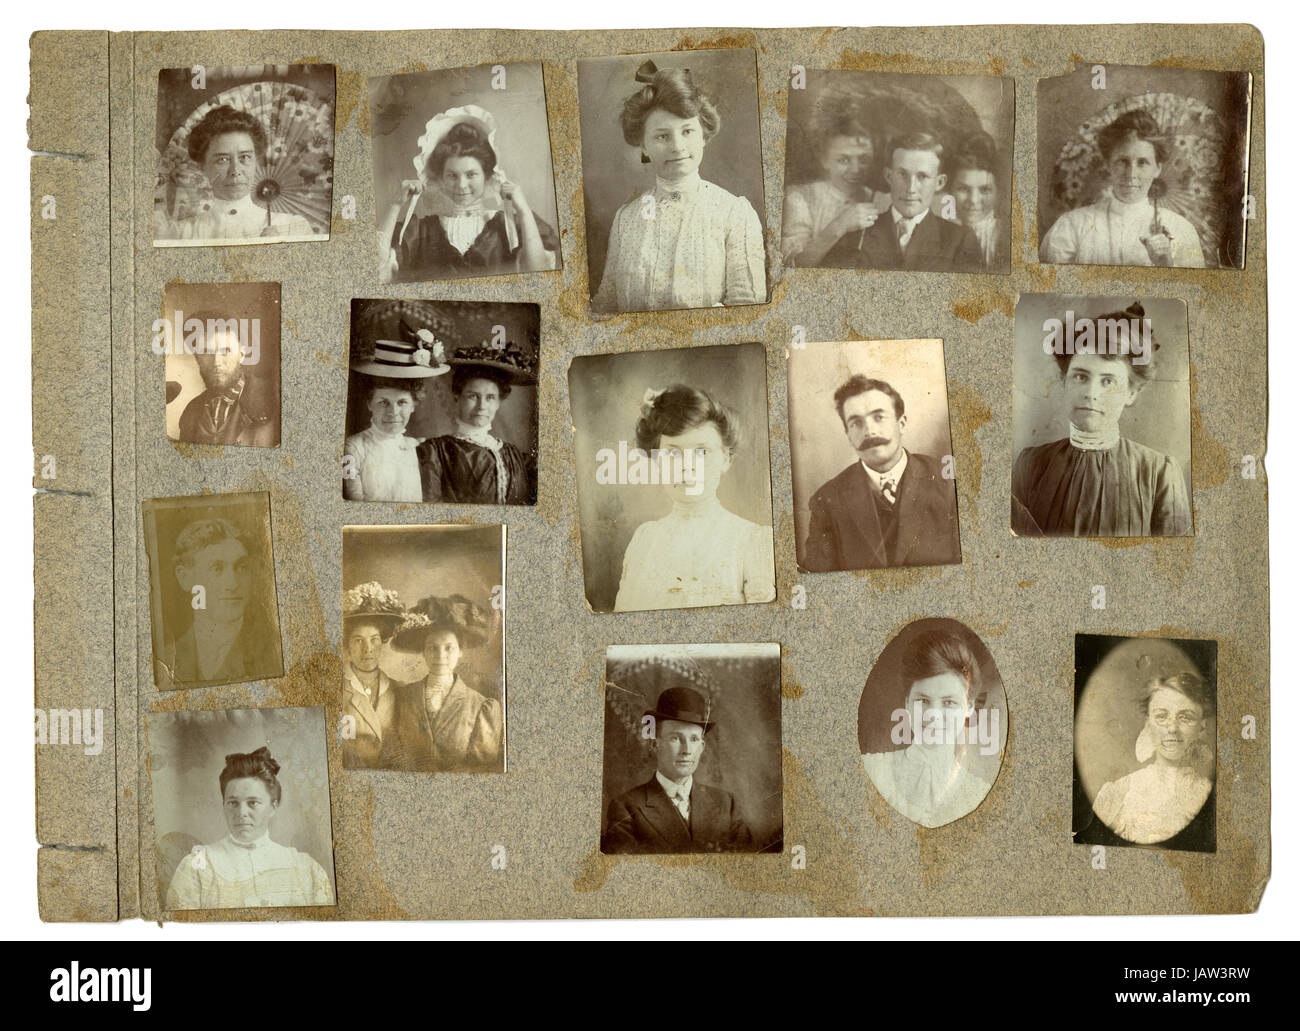 Circa 1900-1910 page from an antique scrapbook with mounted photos of various family members. Location is probably Minnesota. SOURCE: ORIGINAL SCRAPBOOK. Stock Photo